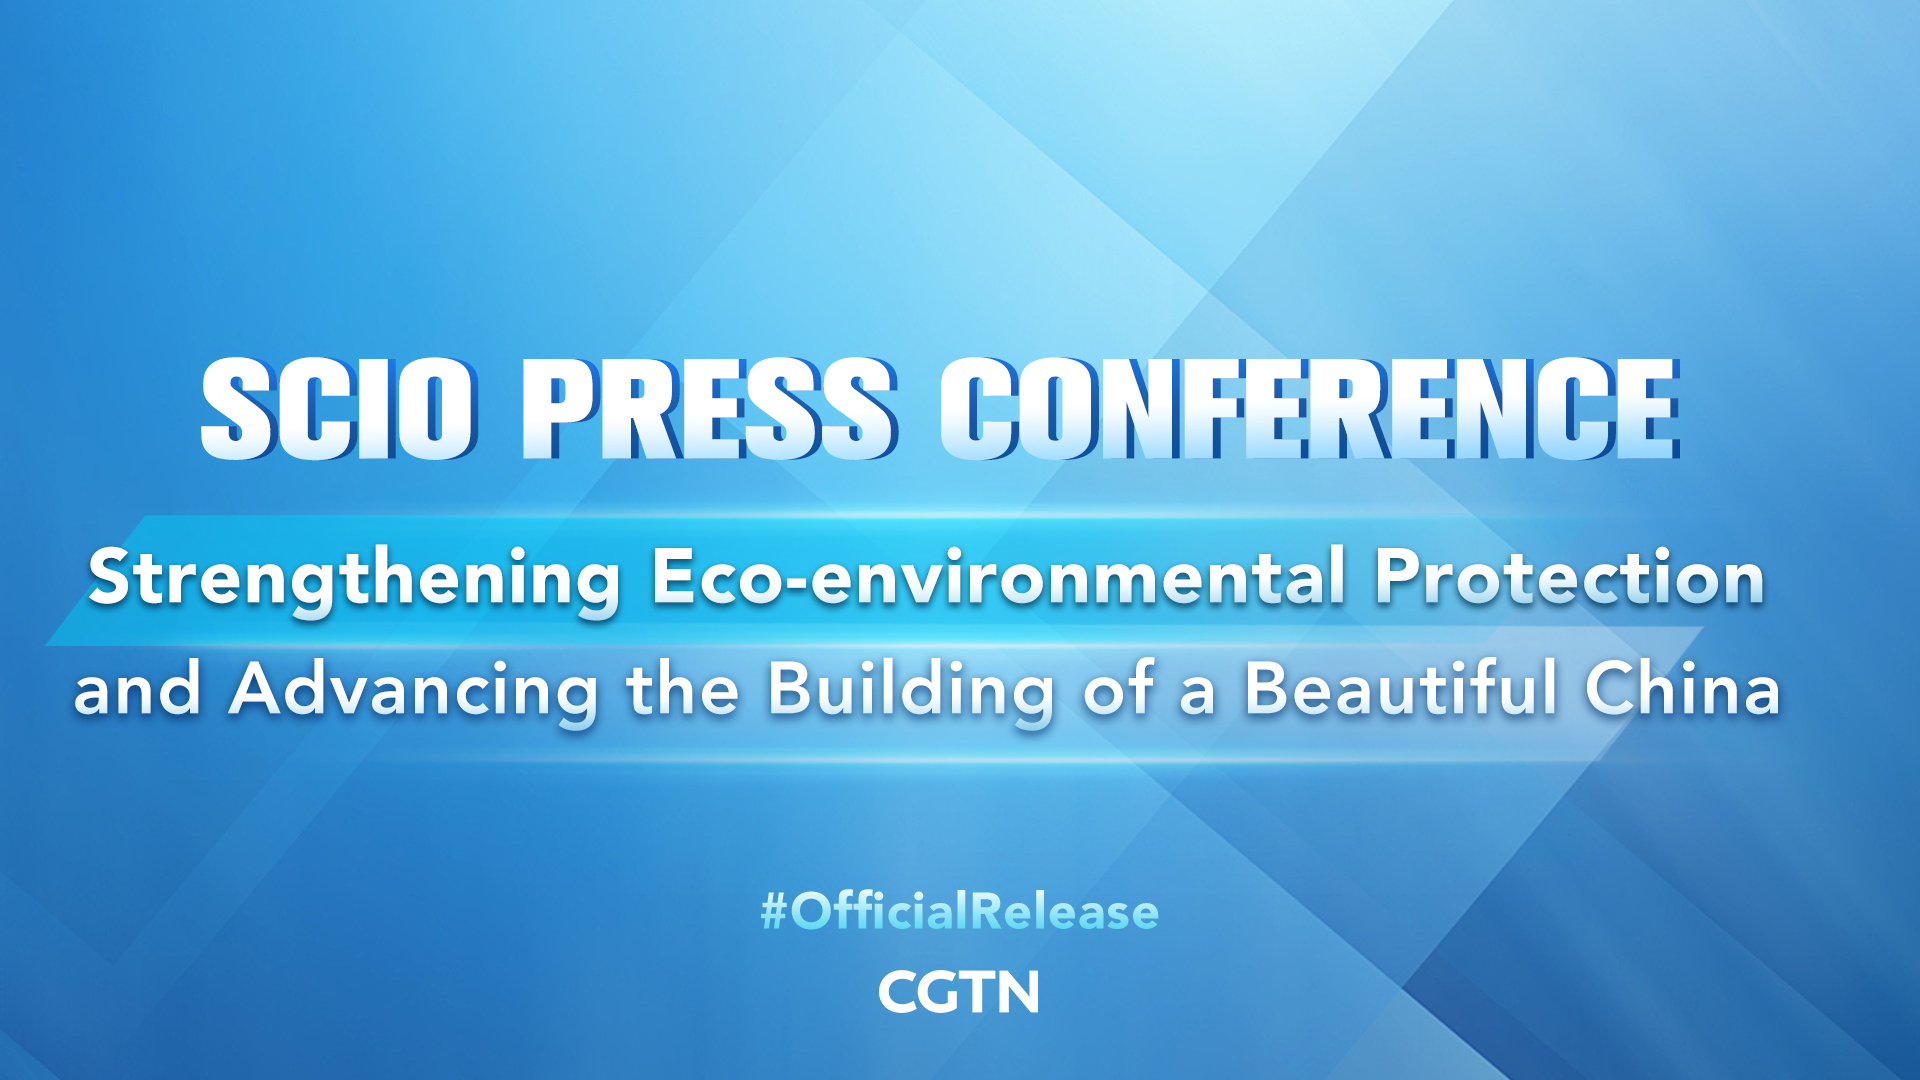 Live: SCIO briefing on strengthening eco-environmental protection for a Beautiful China